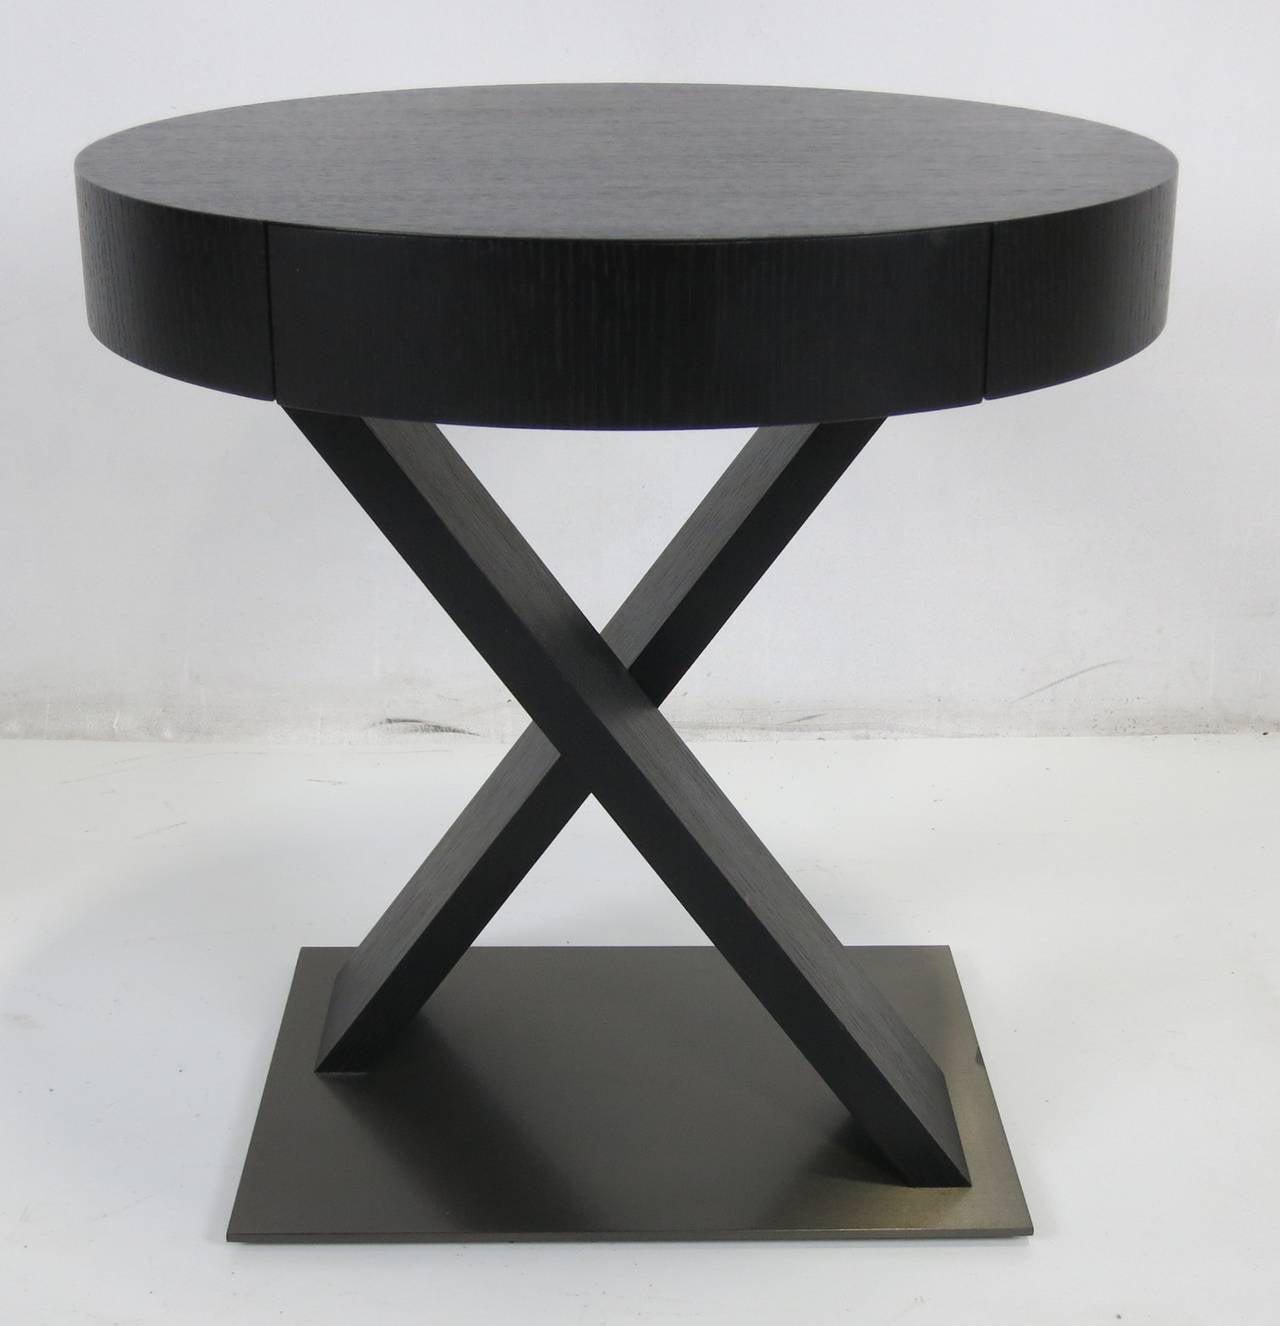 Fabulous pair of Cimarosa side tables in ebonized oak with crossed supports on a bronze base by Armani Casa. Each table has a small drawer concealed in the apron. The last photo shows the tables in Armani's bedroom in his Swiss Alps retreat.  He has